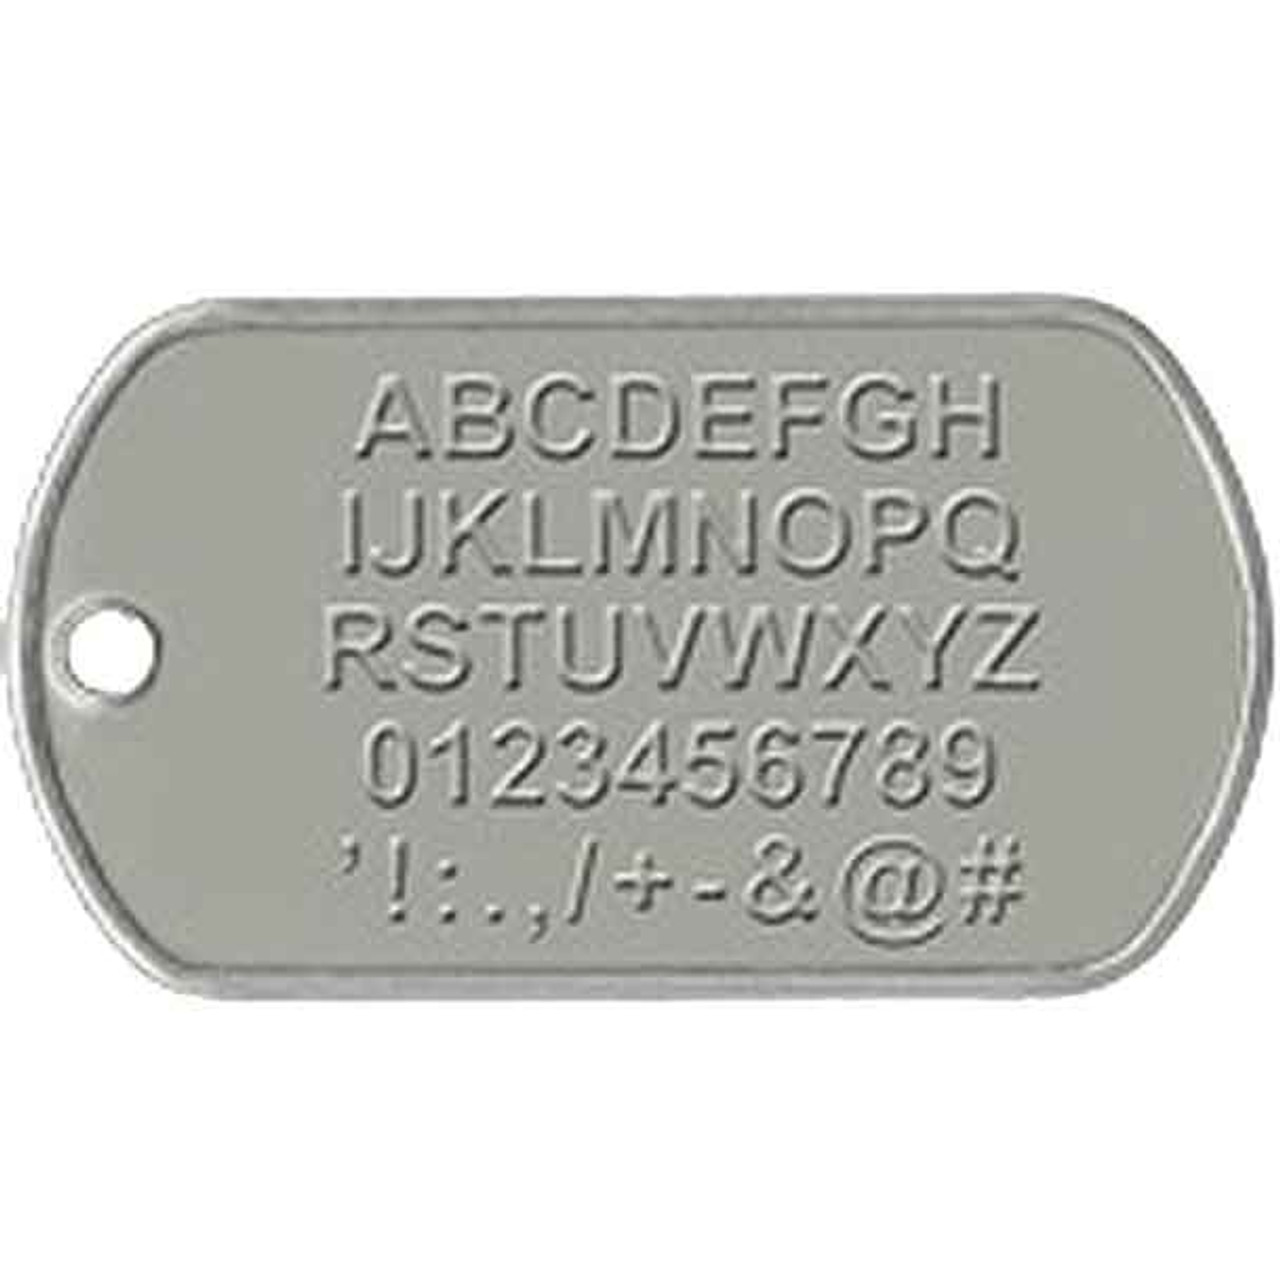 Personalized Military Dog Tags with Silencers; Custom Authentic